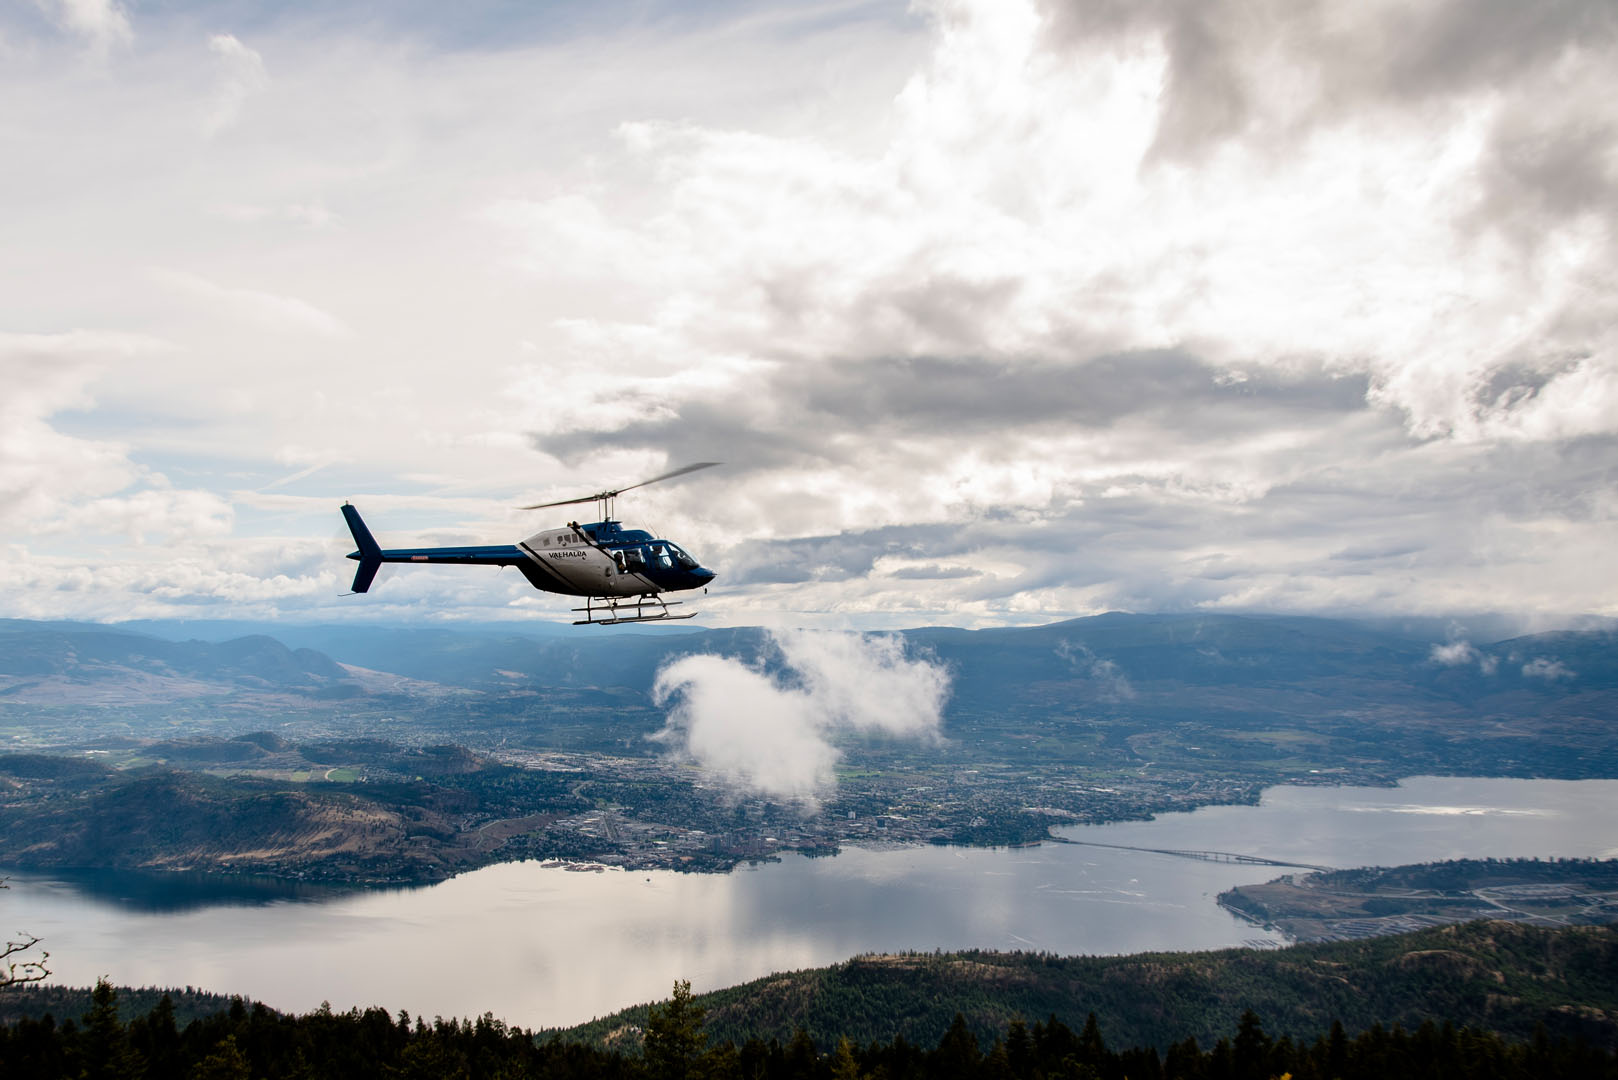 Kelowna Helicopter Tour - Tour the Okanagan with Valhalla Helicopters